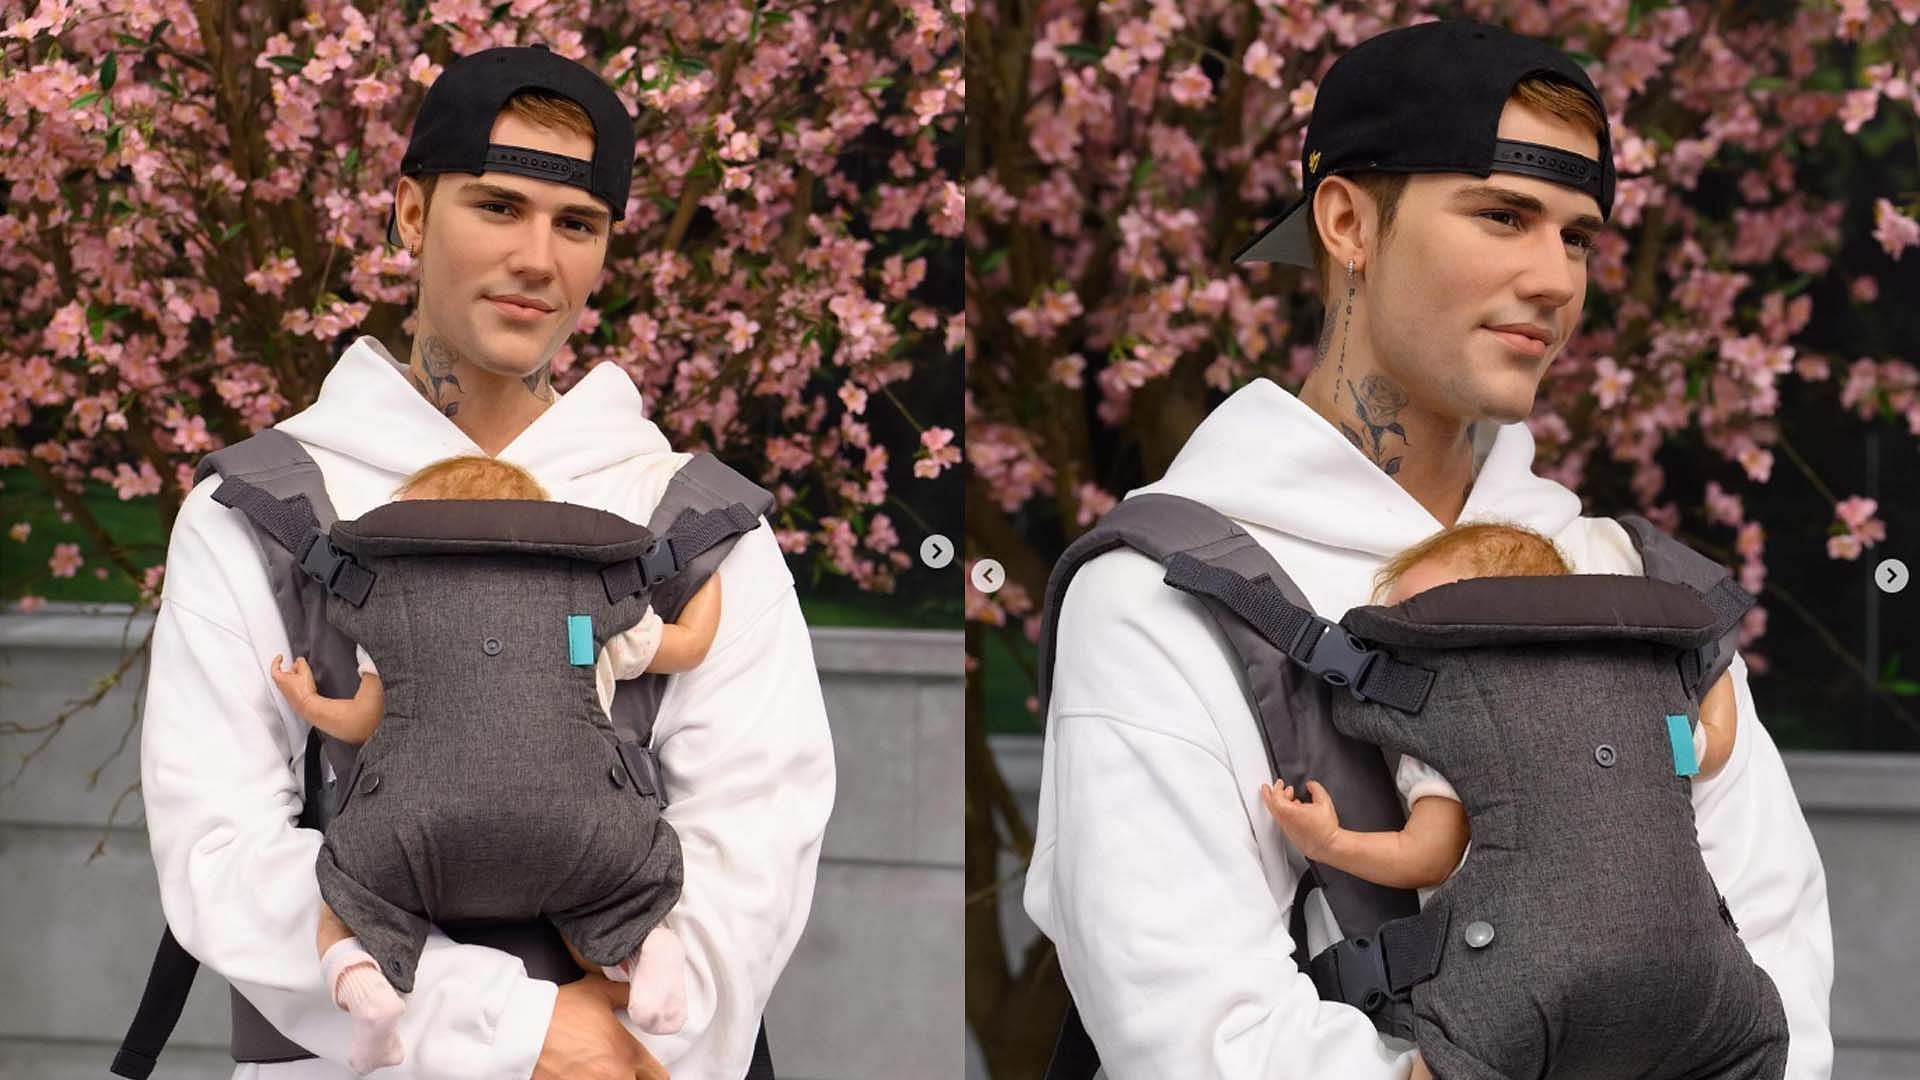 Madame Tussauds London adds a baby carrier to Justin Bieber